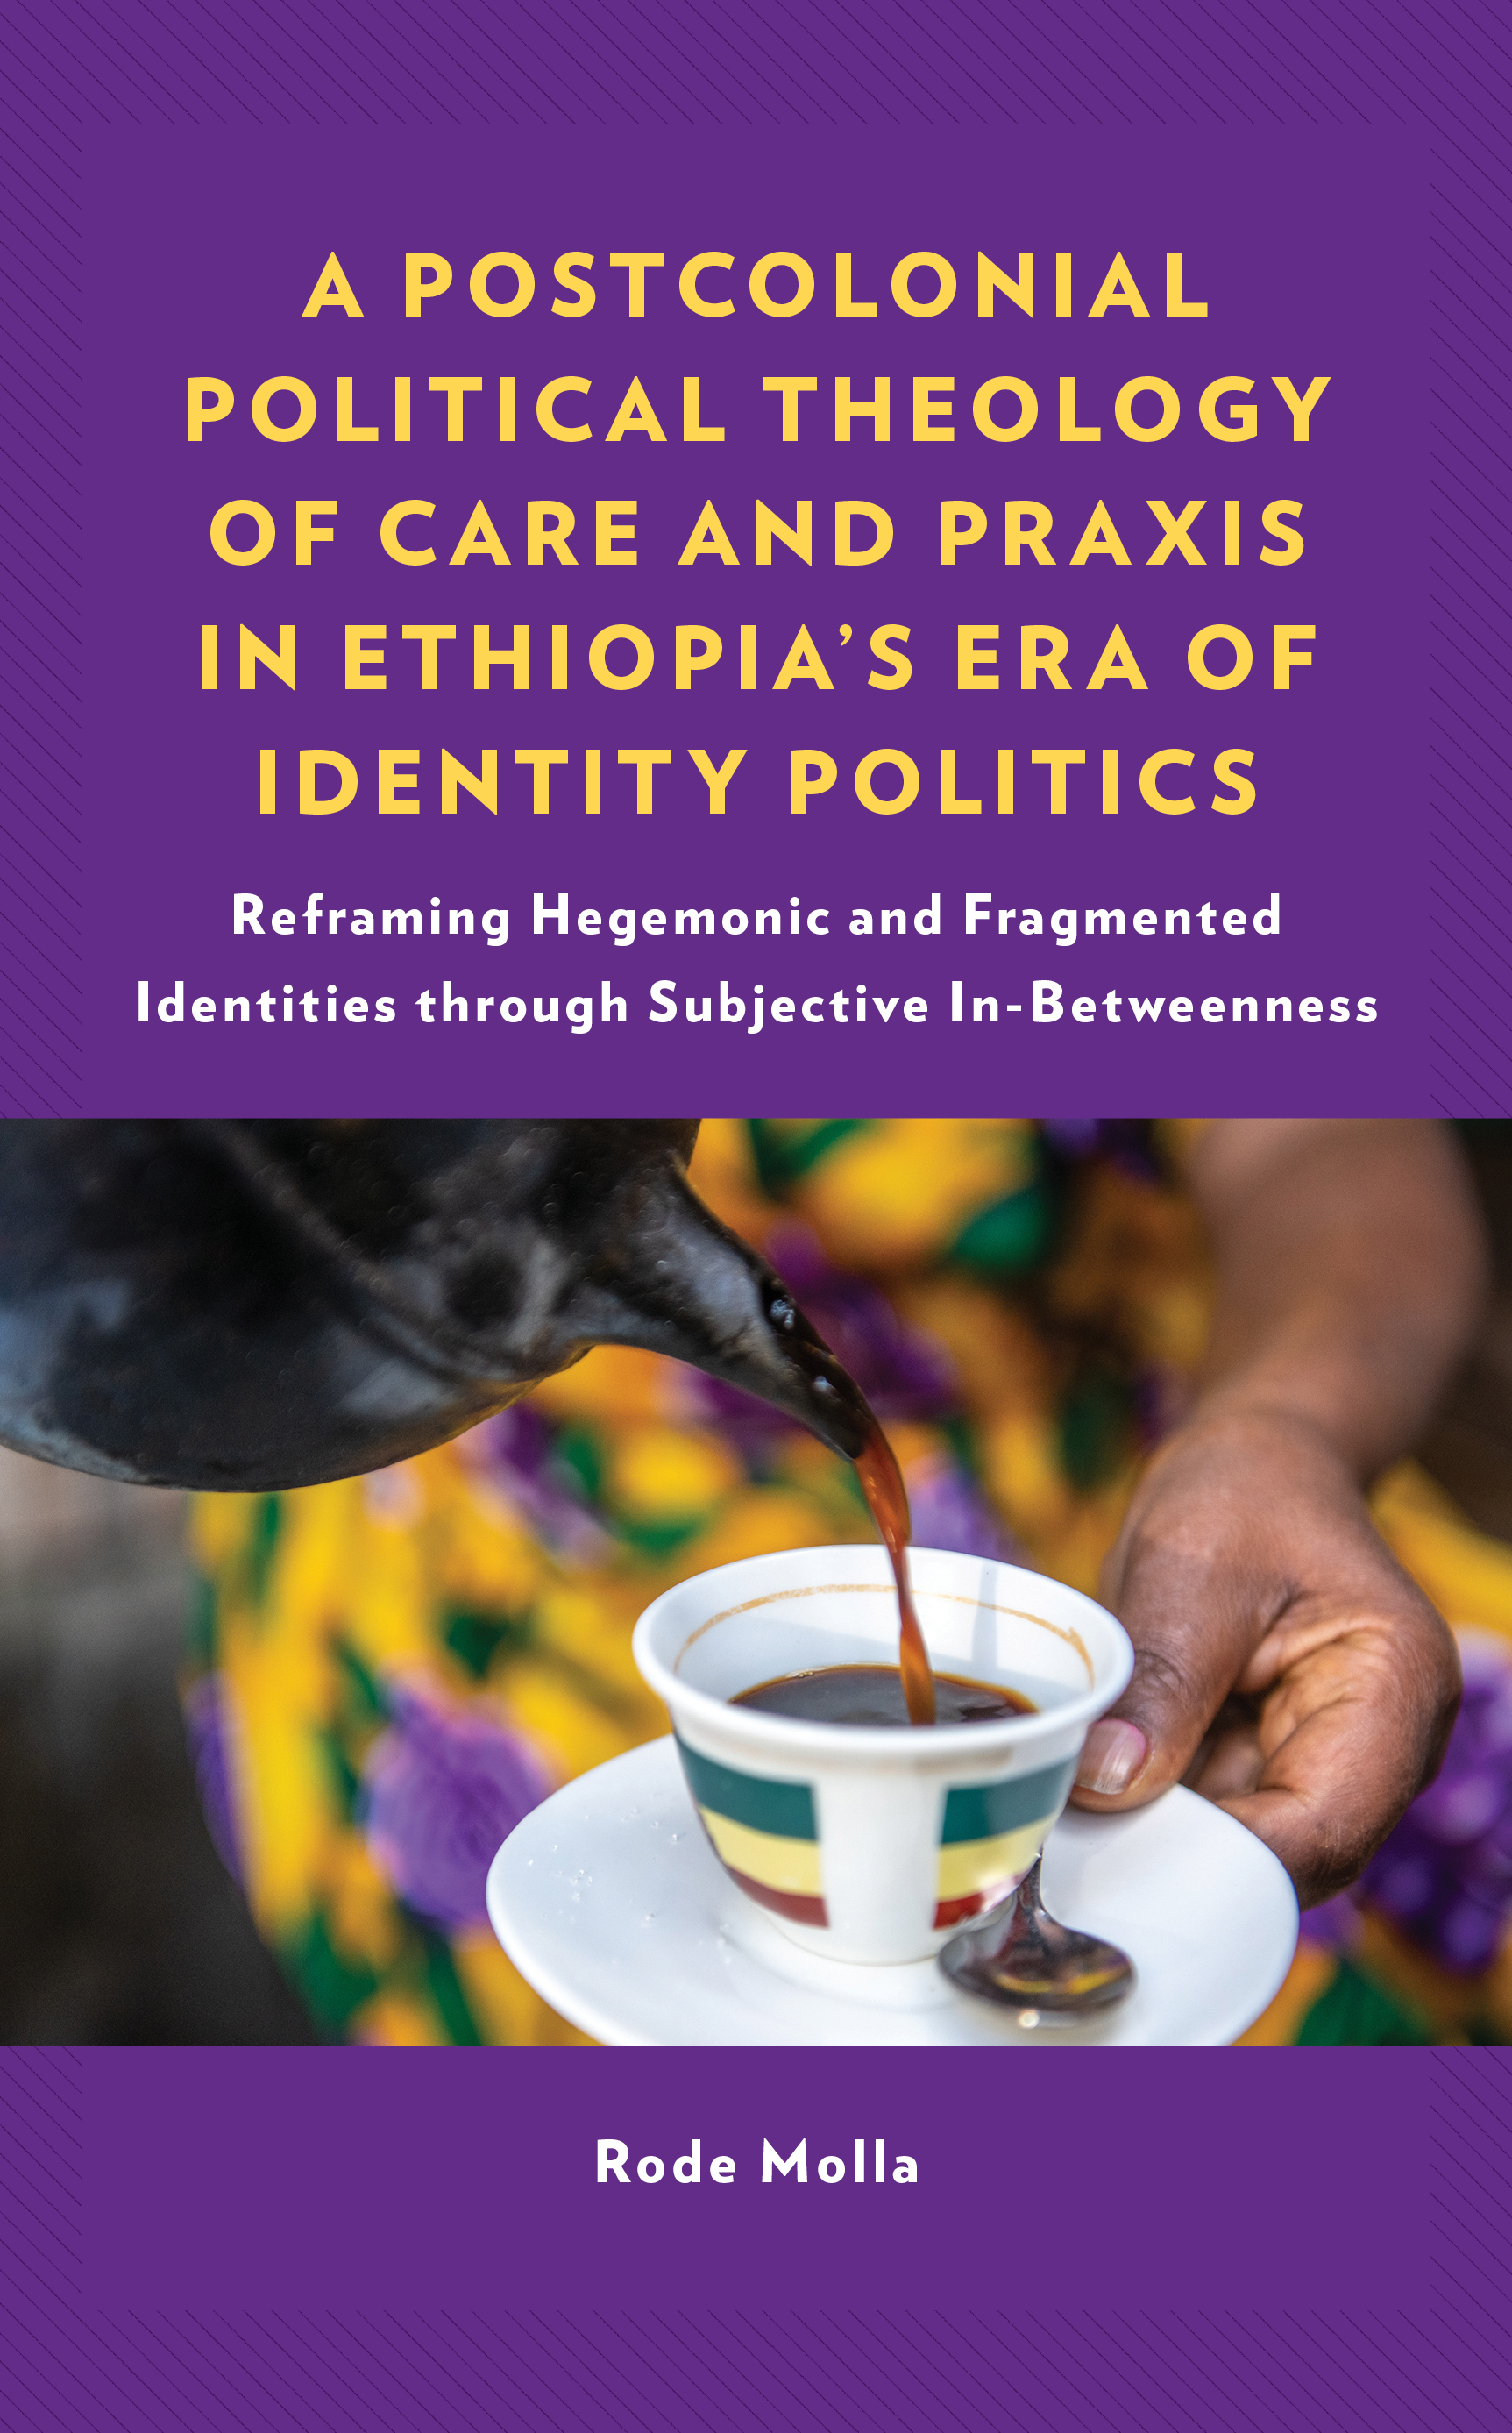 A Postcolonial Political Theology of Care and Praxis in Ethiopia's Era of Identity Politics: Reframing Hegemonic and Fragmented Identities through Subjective In-Betweenness